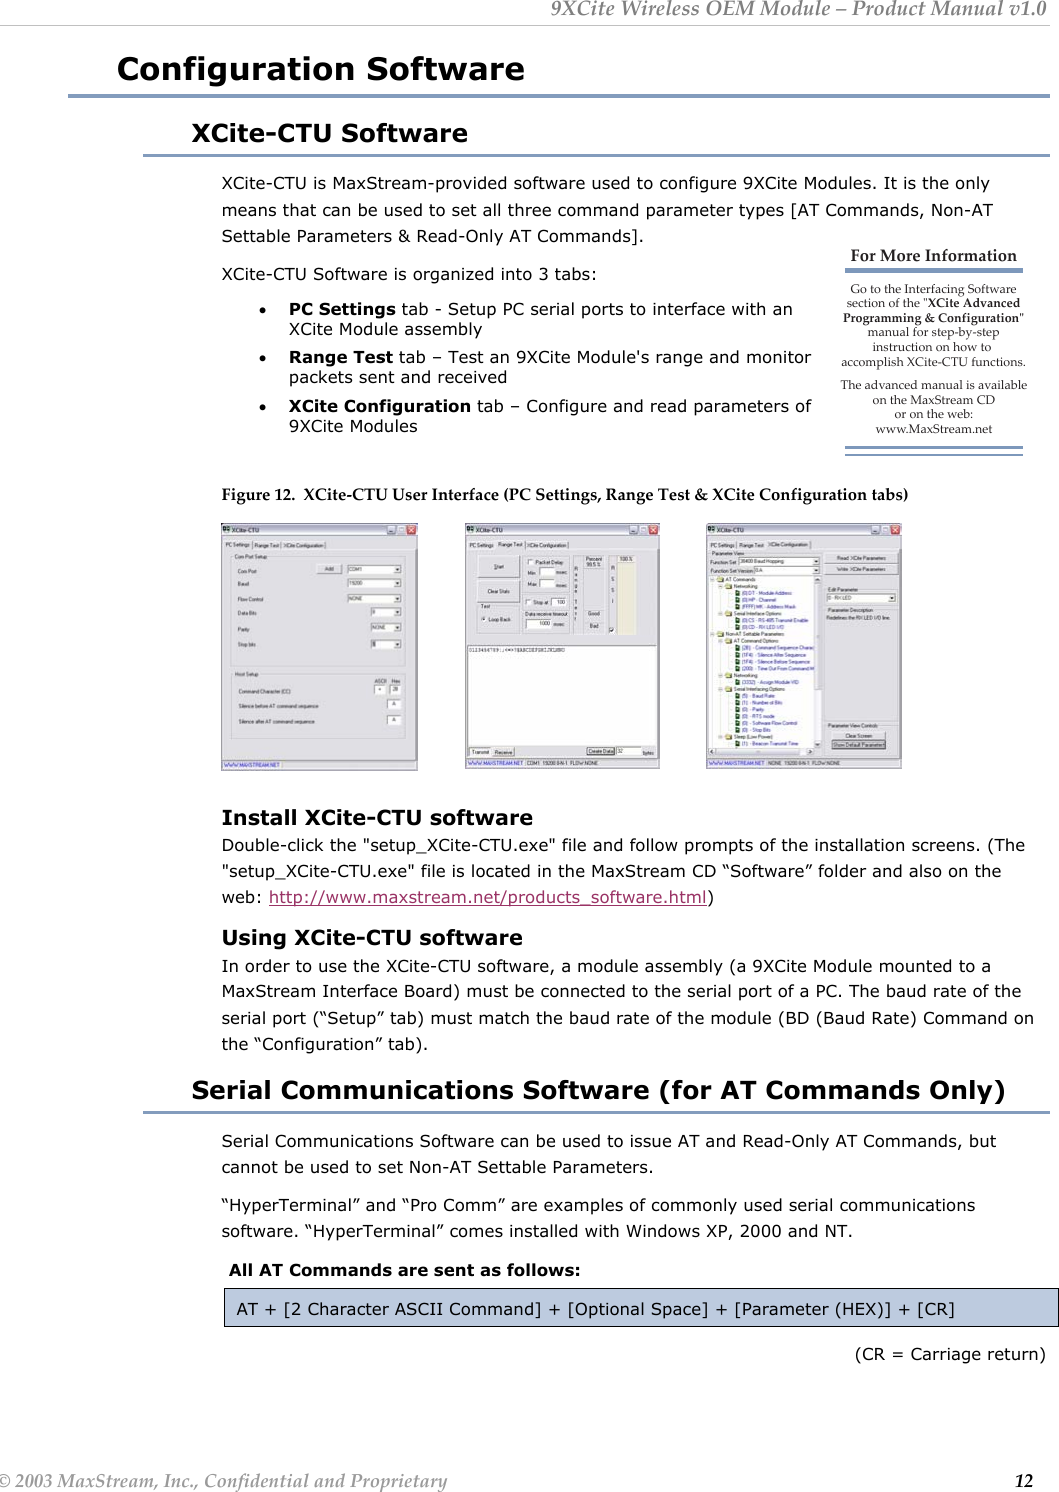 9XCite Wireless OEM Module – Product Manual v1.0 Configuration Software XCite-CTU Software XCite-CTU is MaxStream-provided software used to configure 9XCite Modules. It is the only means that can be used to set all three command parameter types [AT Commands, Non-AT Settable Parameters &amp; Read-Only AT Commands].  For More InformationGo to the Interfacing Softwaresection of the &quot;XCite Advanced Programming &amp; Configuration&quot; manual for step-by-stepinstruction on how to accomplish XCite-CTU functions.The advanced manual is available on the MaxStream CDor on the web: www.MaxStream.netXCite-CTU Software is organized into 3 tabs: • PC Settings tab - Setup PC serial ports to interface with an XCite Module assembly • Range Test tab – Test an 9XCite Module&apos;s range and monitor packets sent and received • XCite Configuration tab – Configure and read parameters of 9XCite Modules     Figure 12.  XCite-CTU User Interface (PC Settings, Range Test &amp; XCite Configuration tabs)         Install XCite-CTU software Double-click the &quot;setup_XCite-CTU.exe&quot; file and follow prompts of the installation screens. (The &quot;setup_XCite-CTU.exe&quot; file is located in the MaxStream CD “Software” folder and also on the web: http://www.maxstream.net/products_software.html) Using XCite-CTU software In order to use the XCite-CTU software, a module assembly (a 9XCite Module mounted to a MaxStream Interface Board) must be connected to the serial port of a PC. The baud rate of the serial port (“Setup” tab) must match the baud rate of the module (BD (Baud Rate) Command on the “Configuration” tab). Serial Communications Software (for AT Commands Only) Serial Communications Software can be used to issue AT and Read-Only AT Commands, but cannot be used to set Non-AT Settable Parameters. “HyperTerminal” and “Pro Comm” are examples of commonly used serial communications software. “HyperTerminal” comes installed with Windows XP, 2000 and NT.  All AT Commands are sent as follows: AT + [2 Character ASCII Command] + [Optional Space] + [Parameter (HEX)] + [CR] (CR = Carriage return) © 2003 MaxStream, Inc., Confidential and Proprietary                                                                                                                         12 